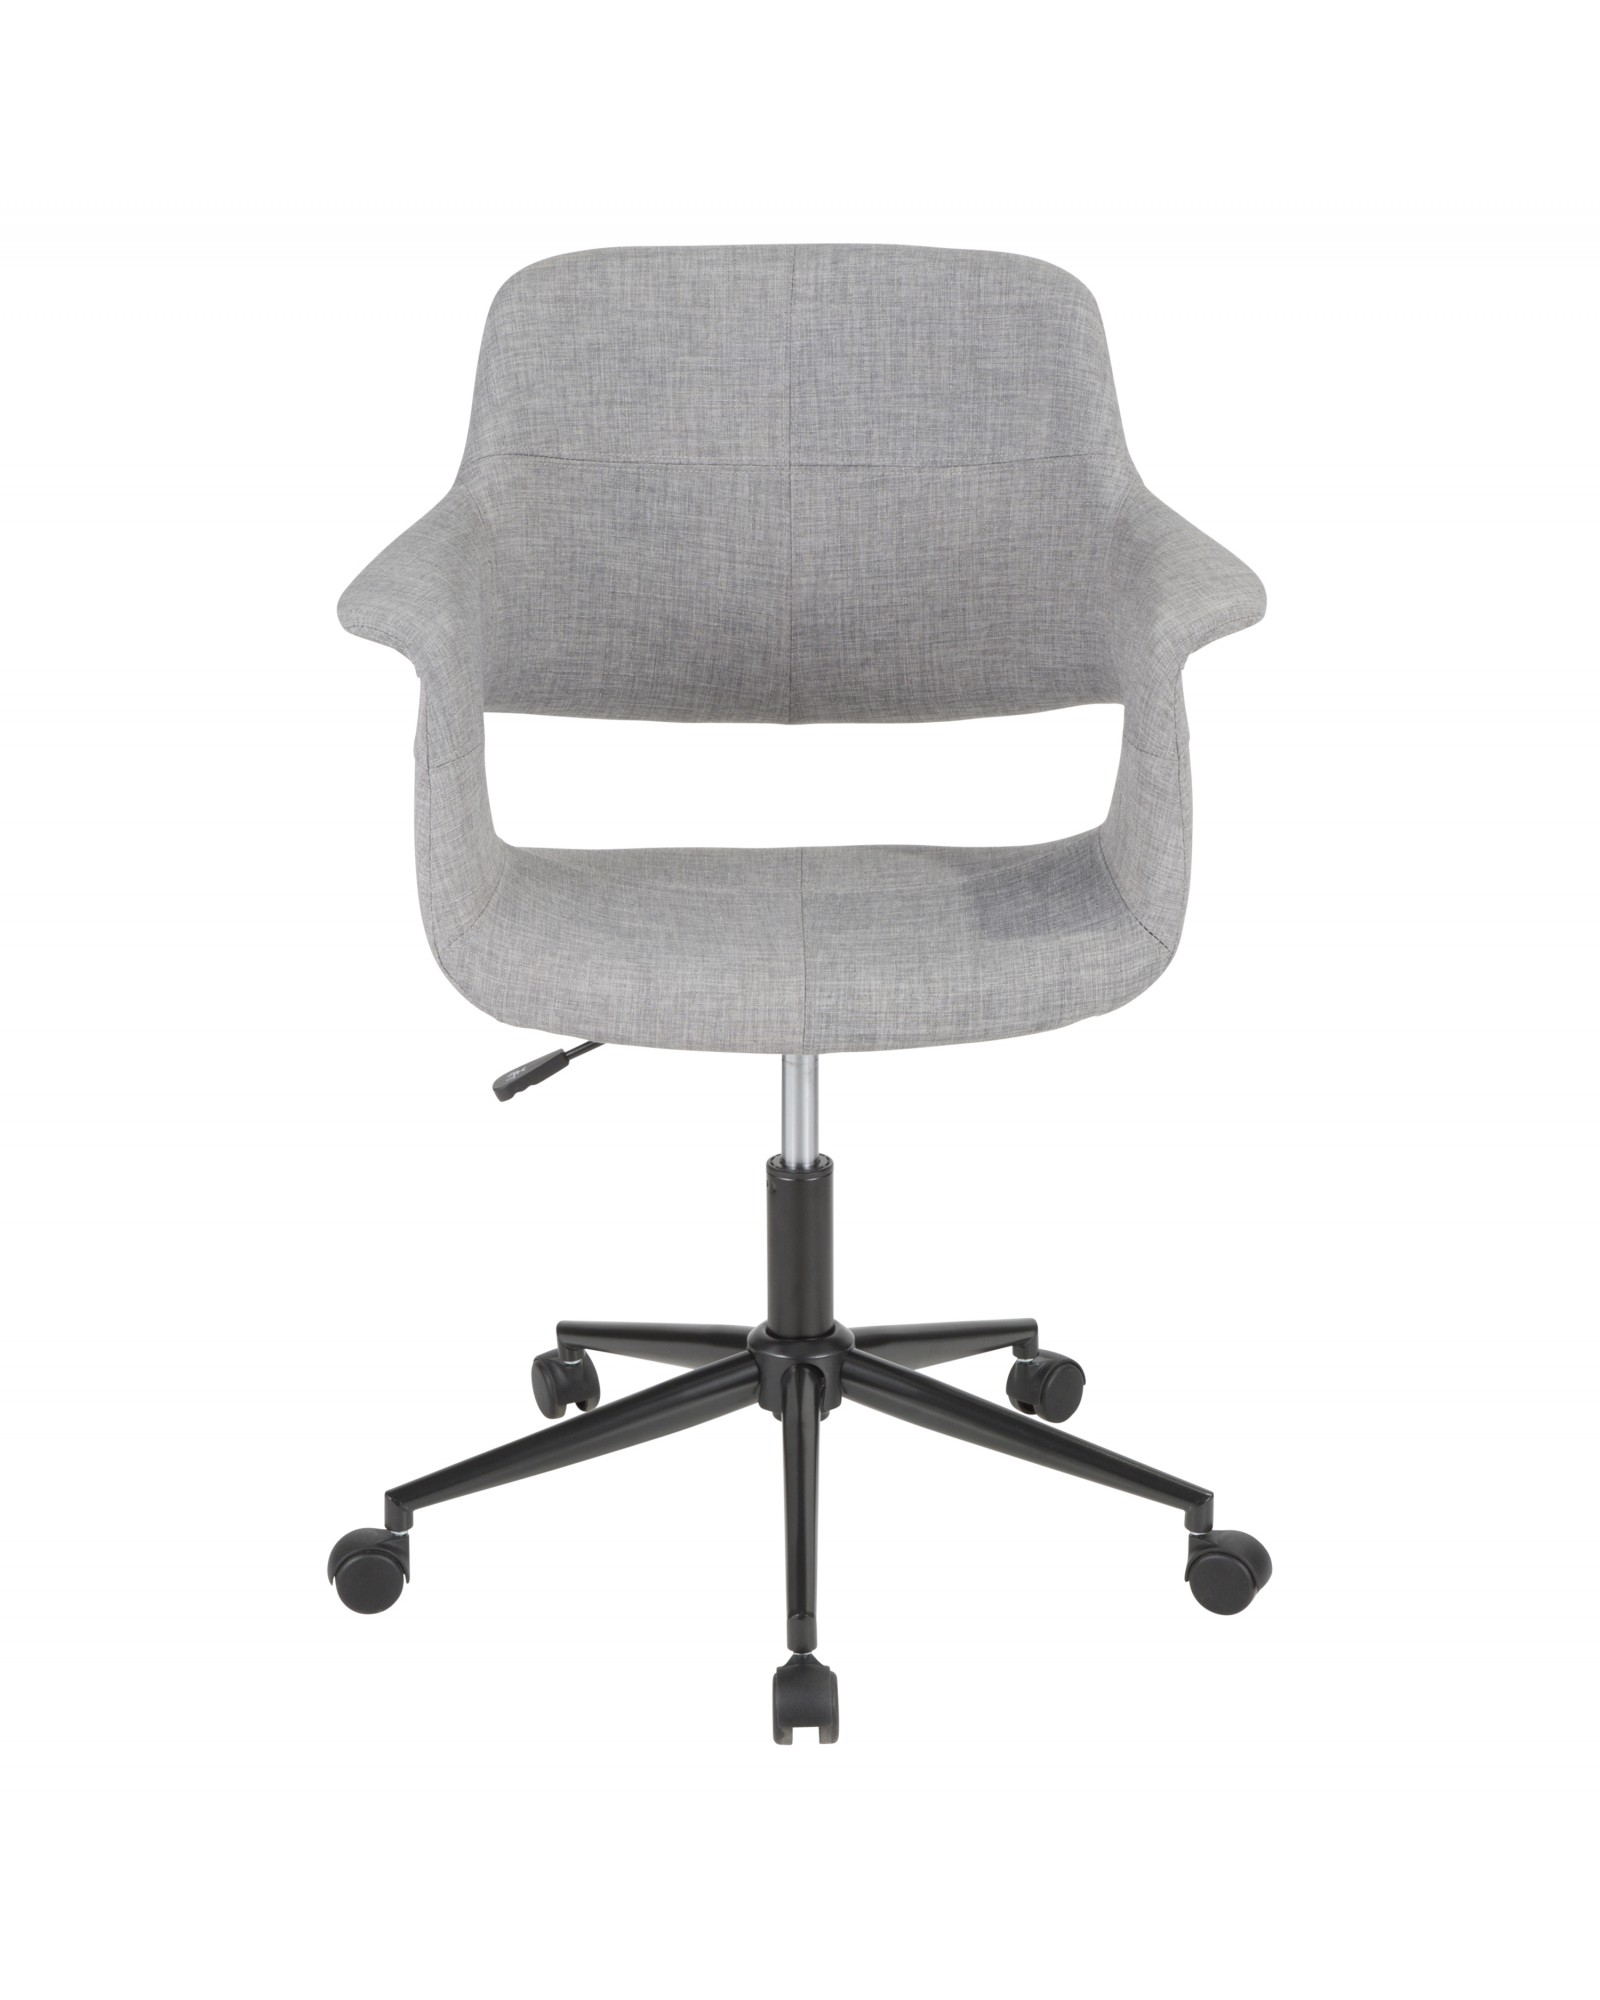 Vintage Flair Mid-Century Modern Office Chair in Grey with Black Metal Base